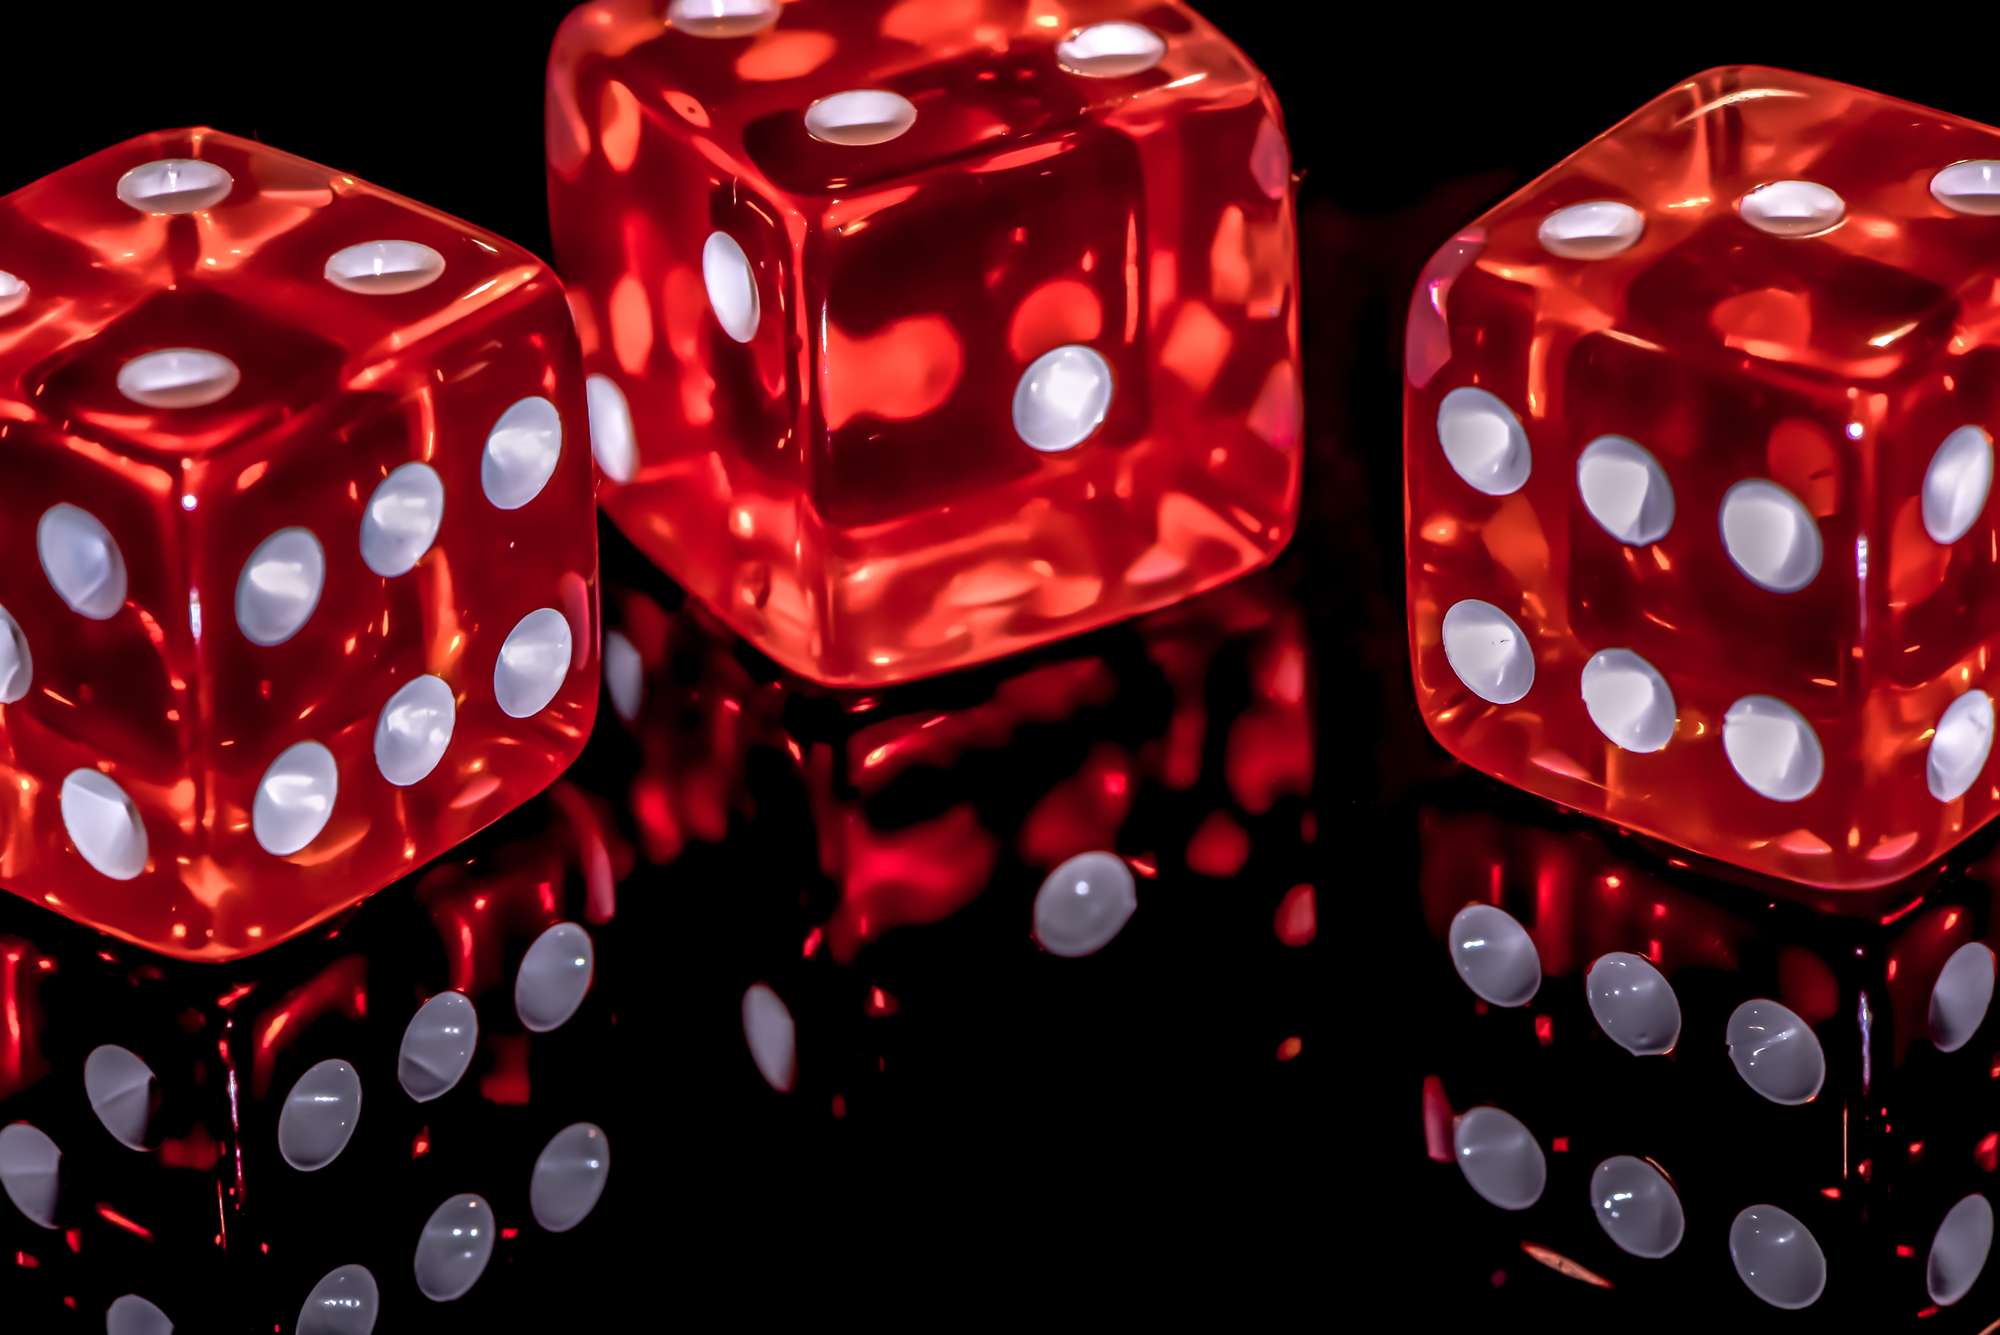 Close-up of three red dice on a dark, reflective surface.